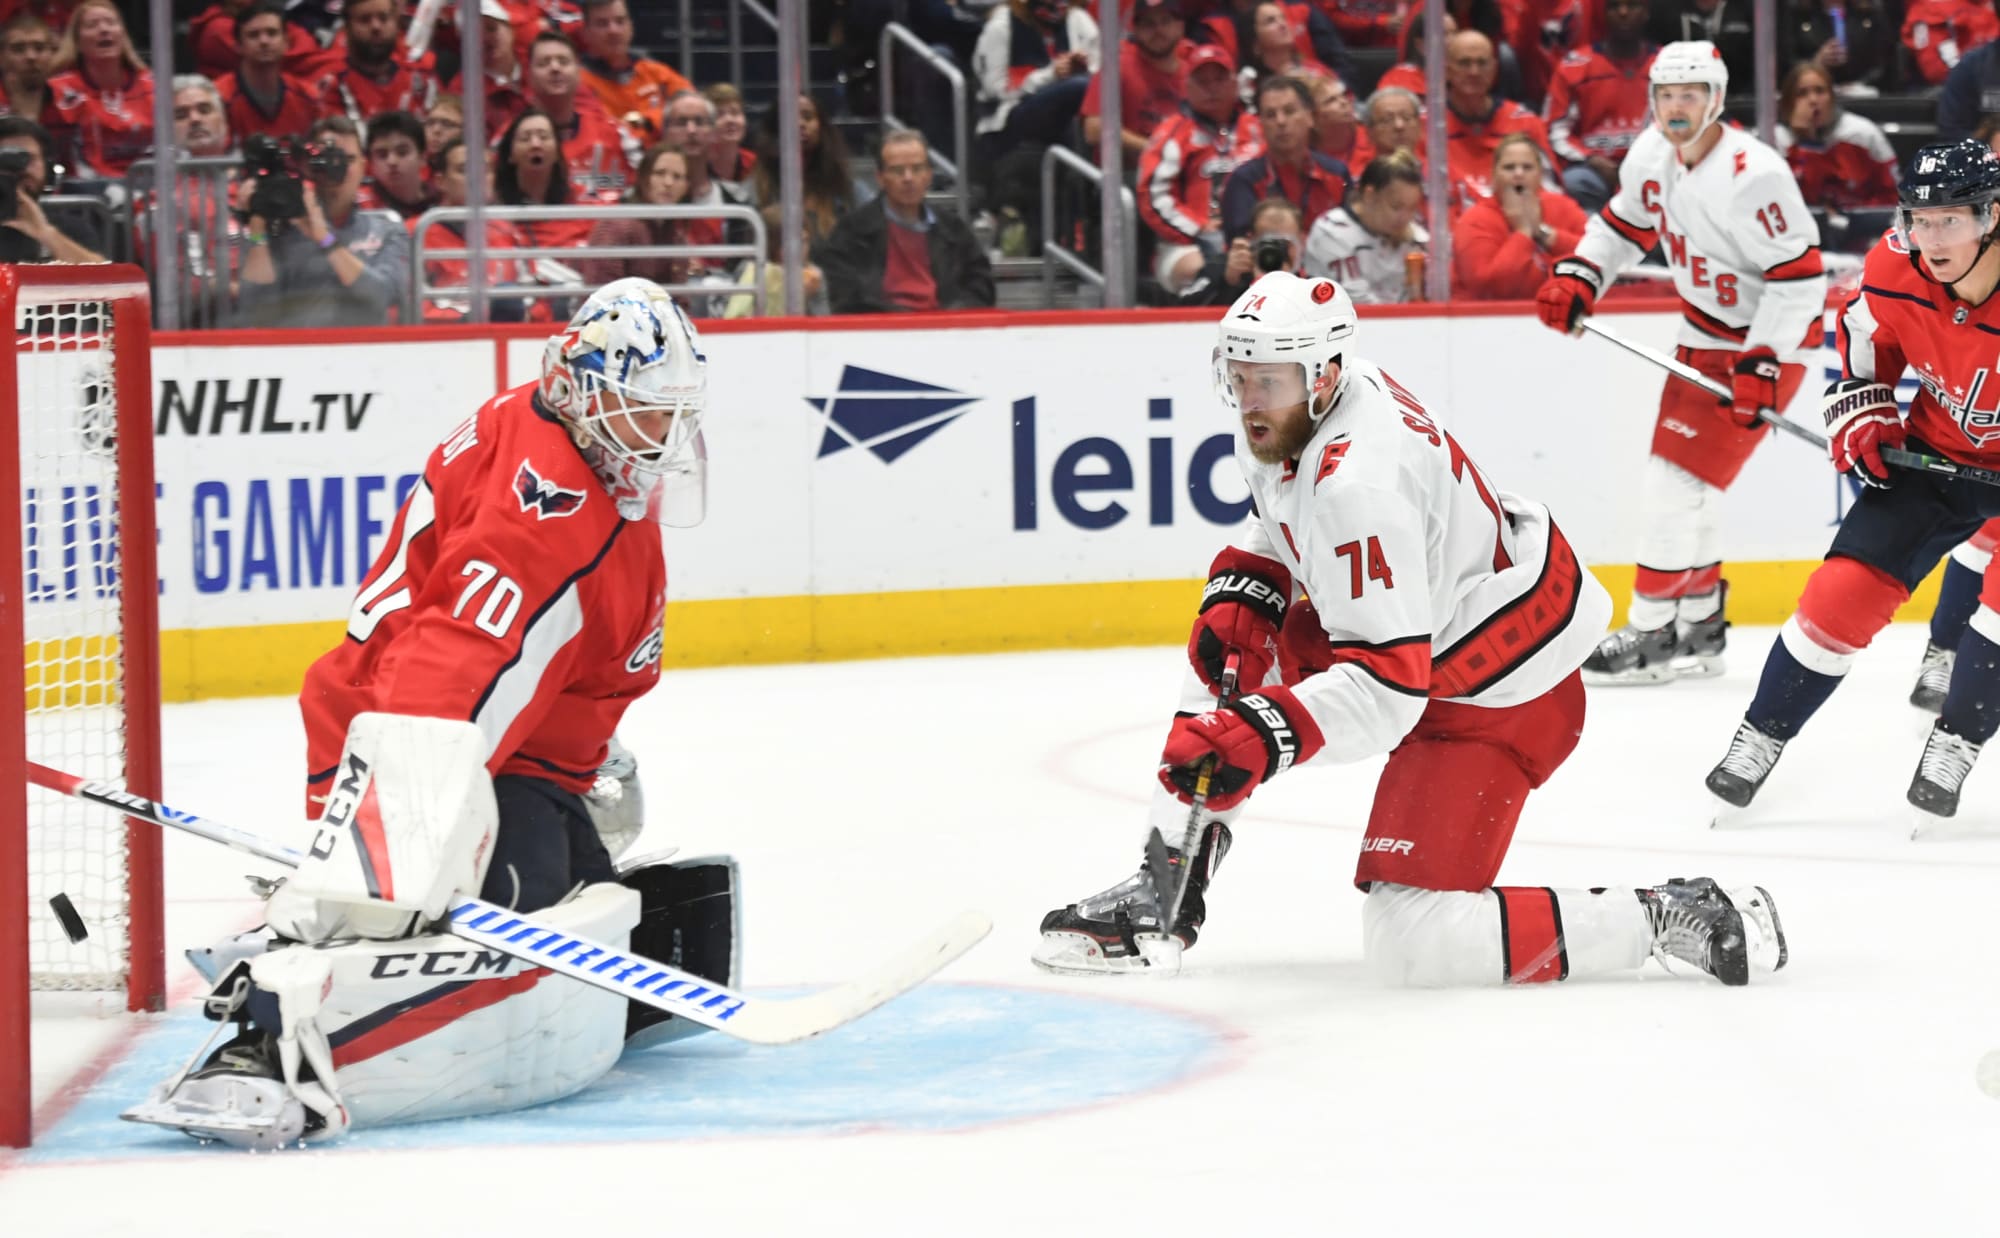 Capitals vs Hurricanes Date, Time, Streaming and More